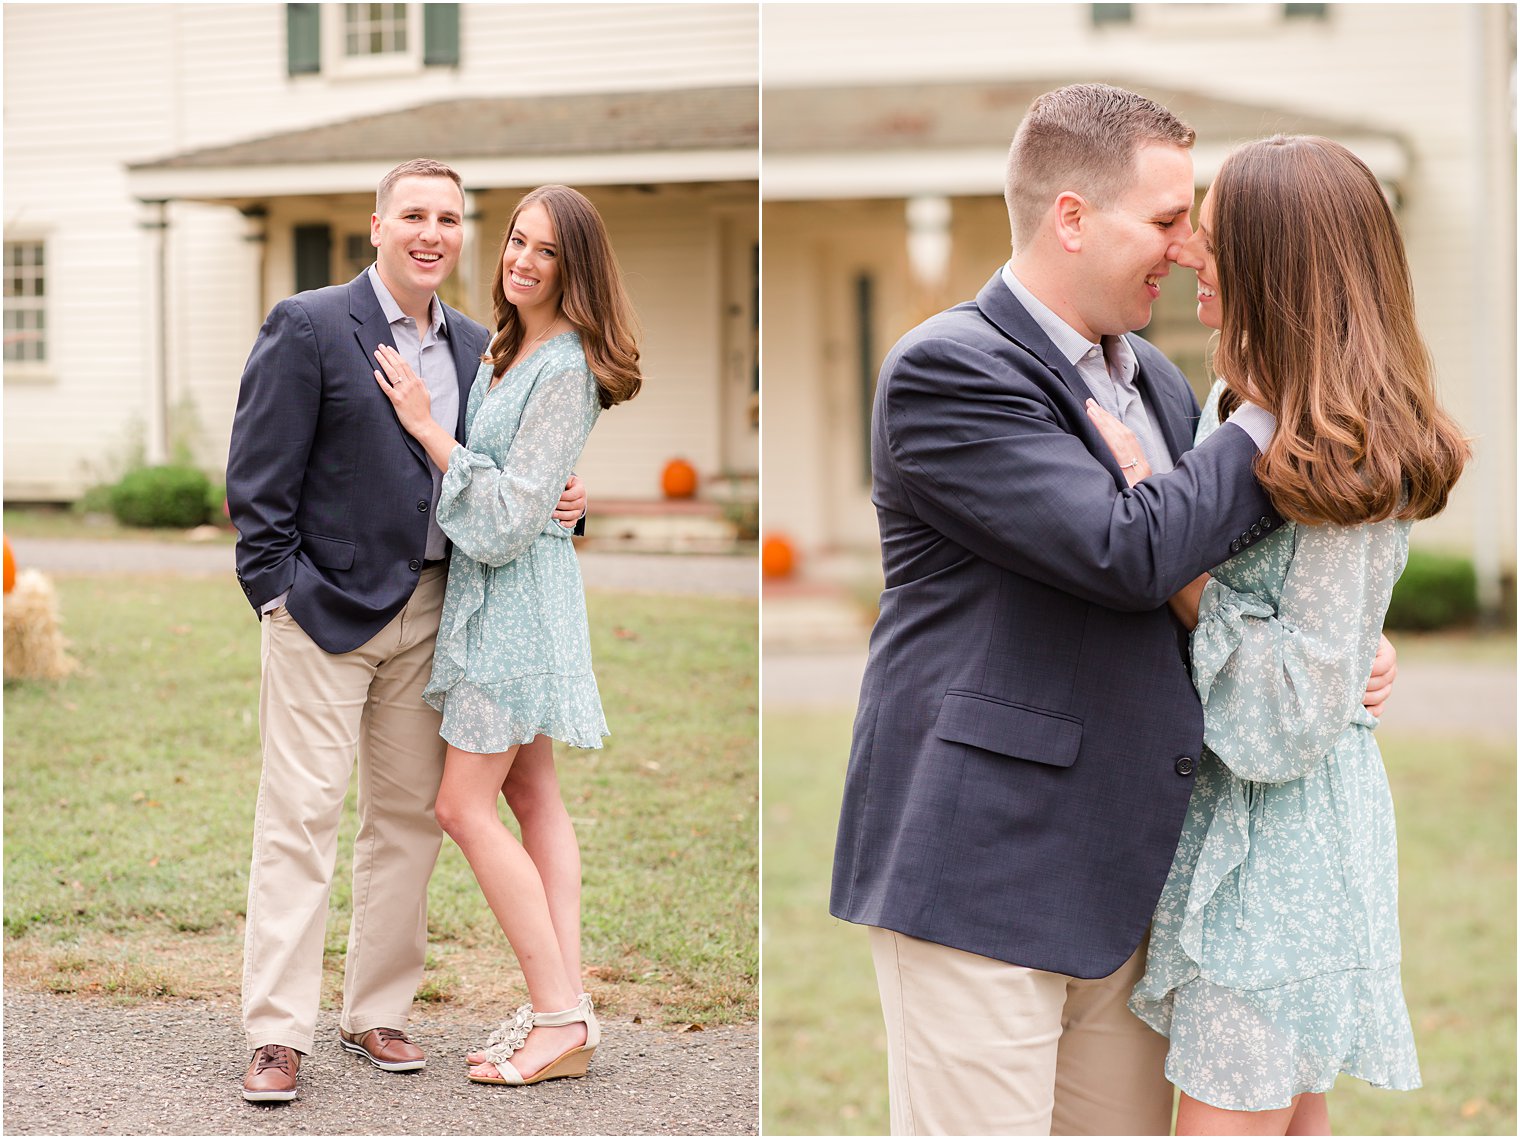 New Jersey engagement session by Idalia Photography